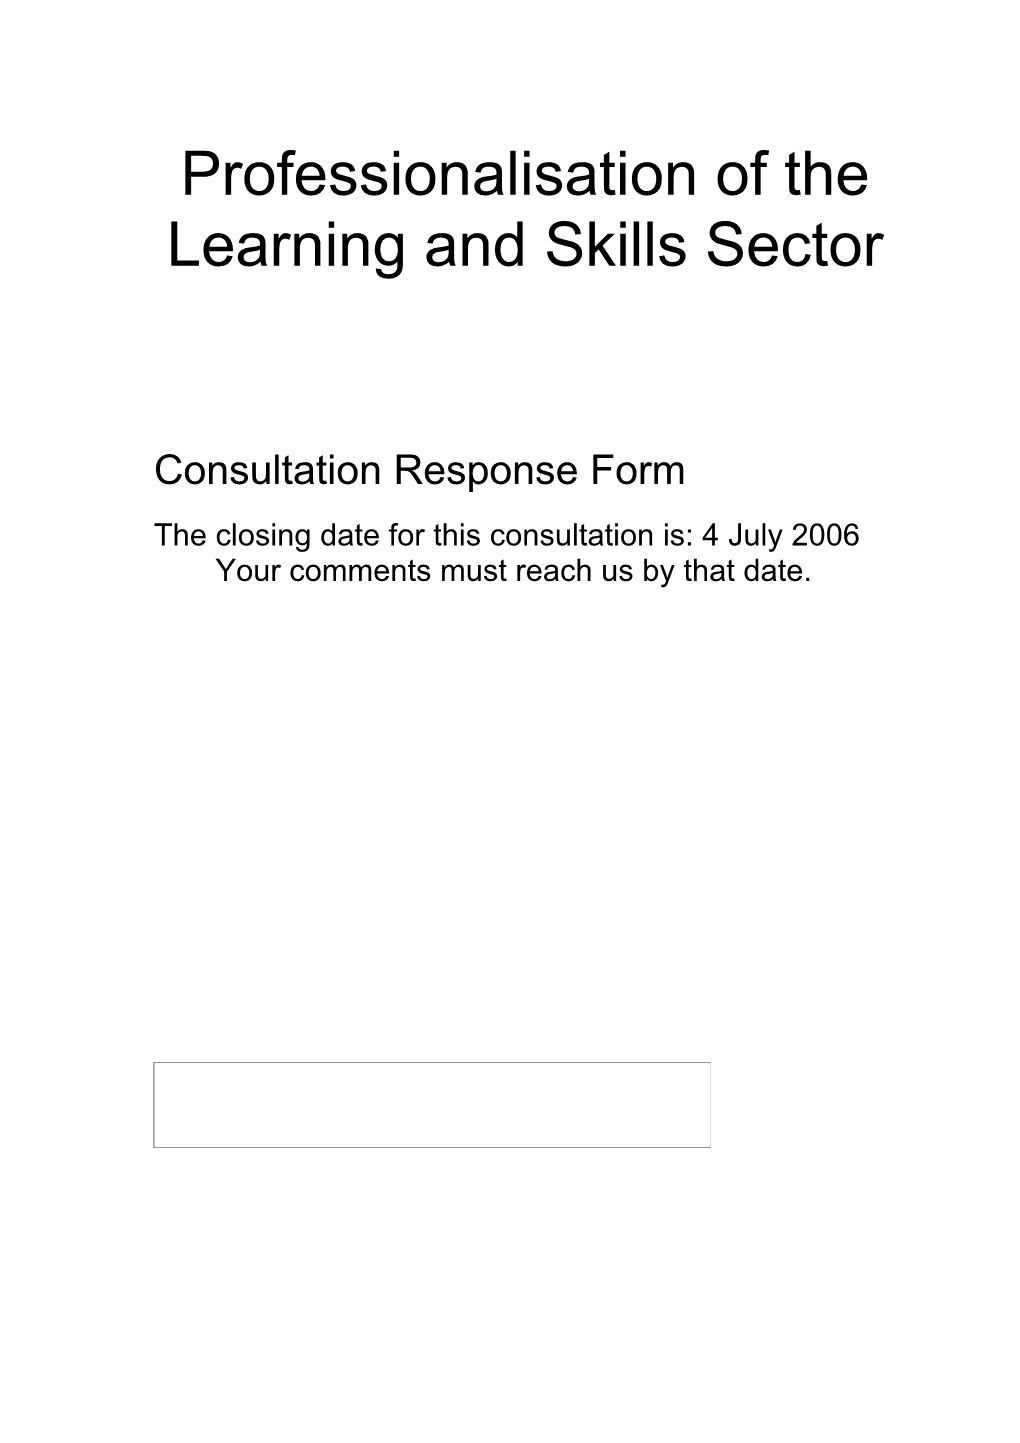 Professionalisation of the Learning and Skills Sector